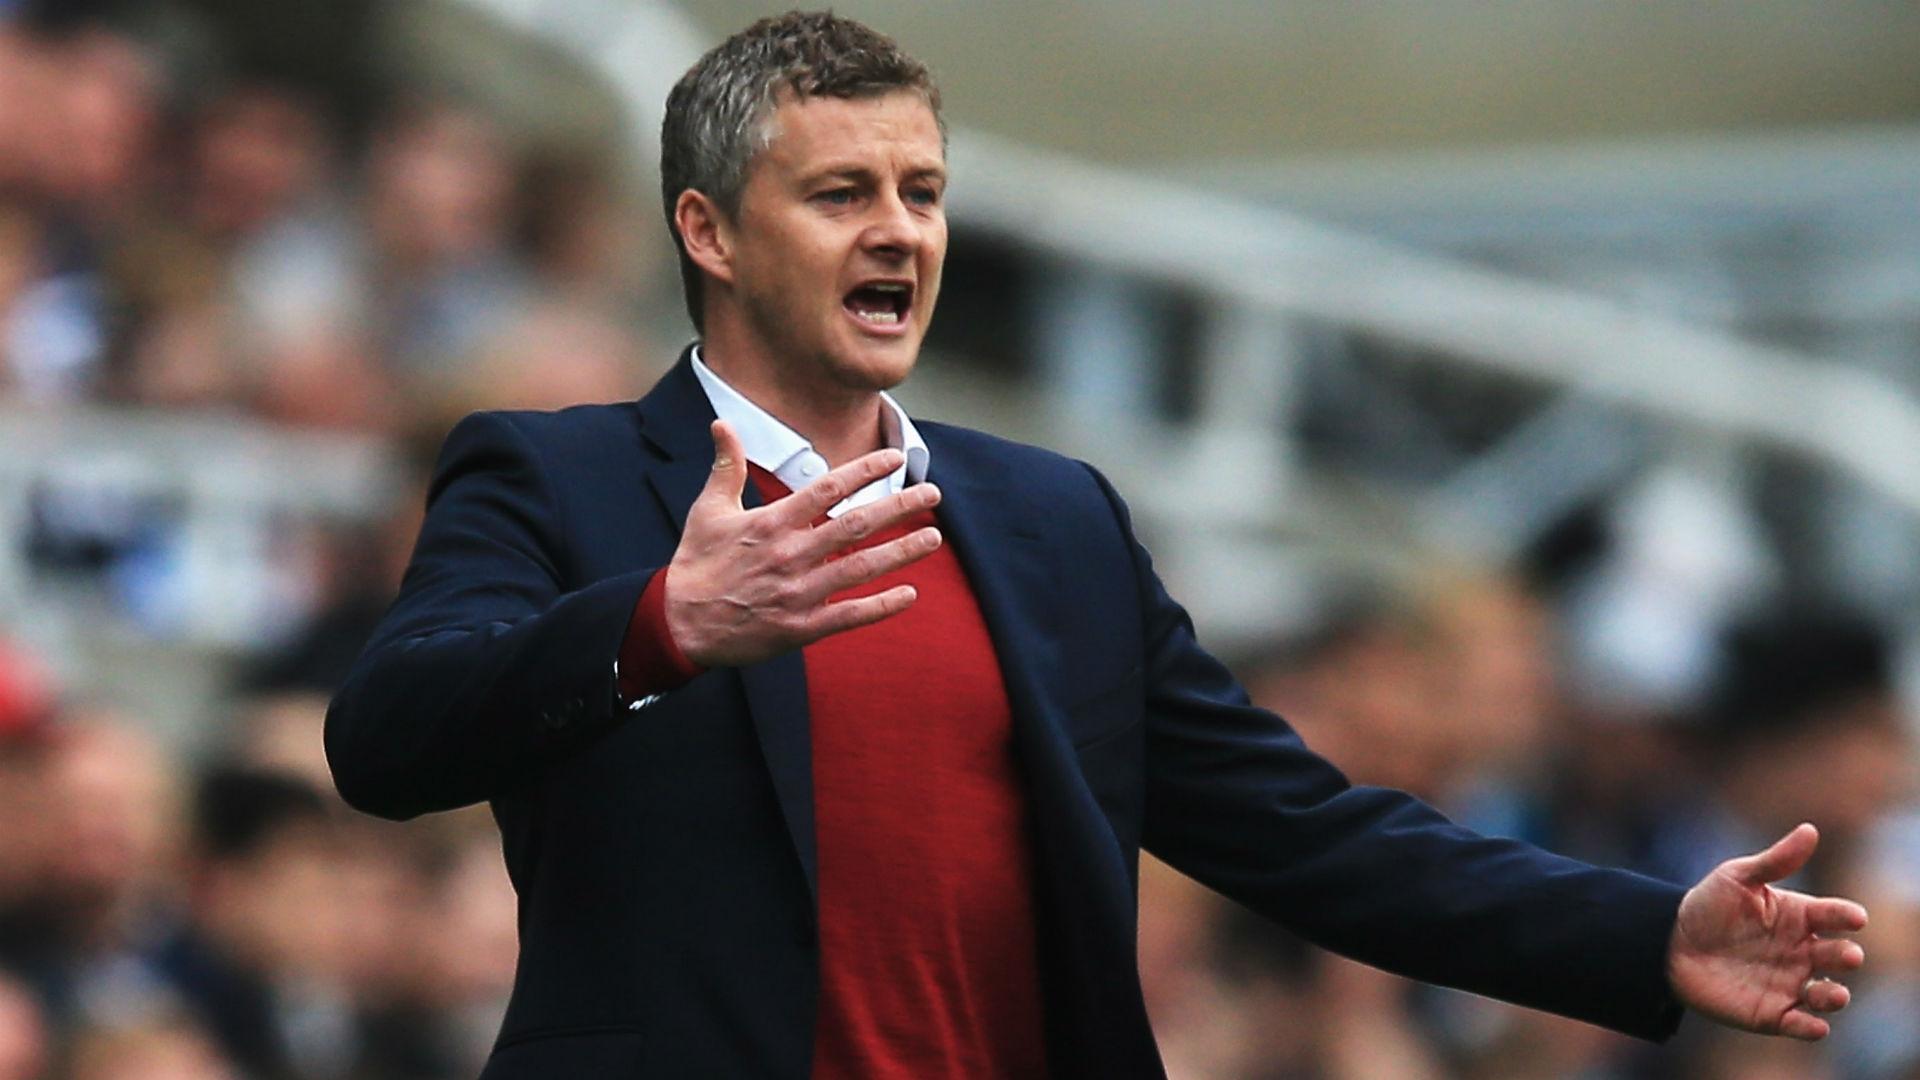 Solskjaer to manage United as Liverpool target Christmas No.1 spot